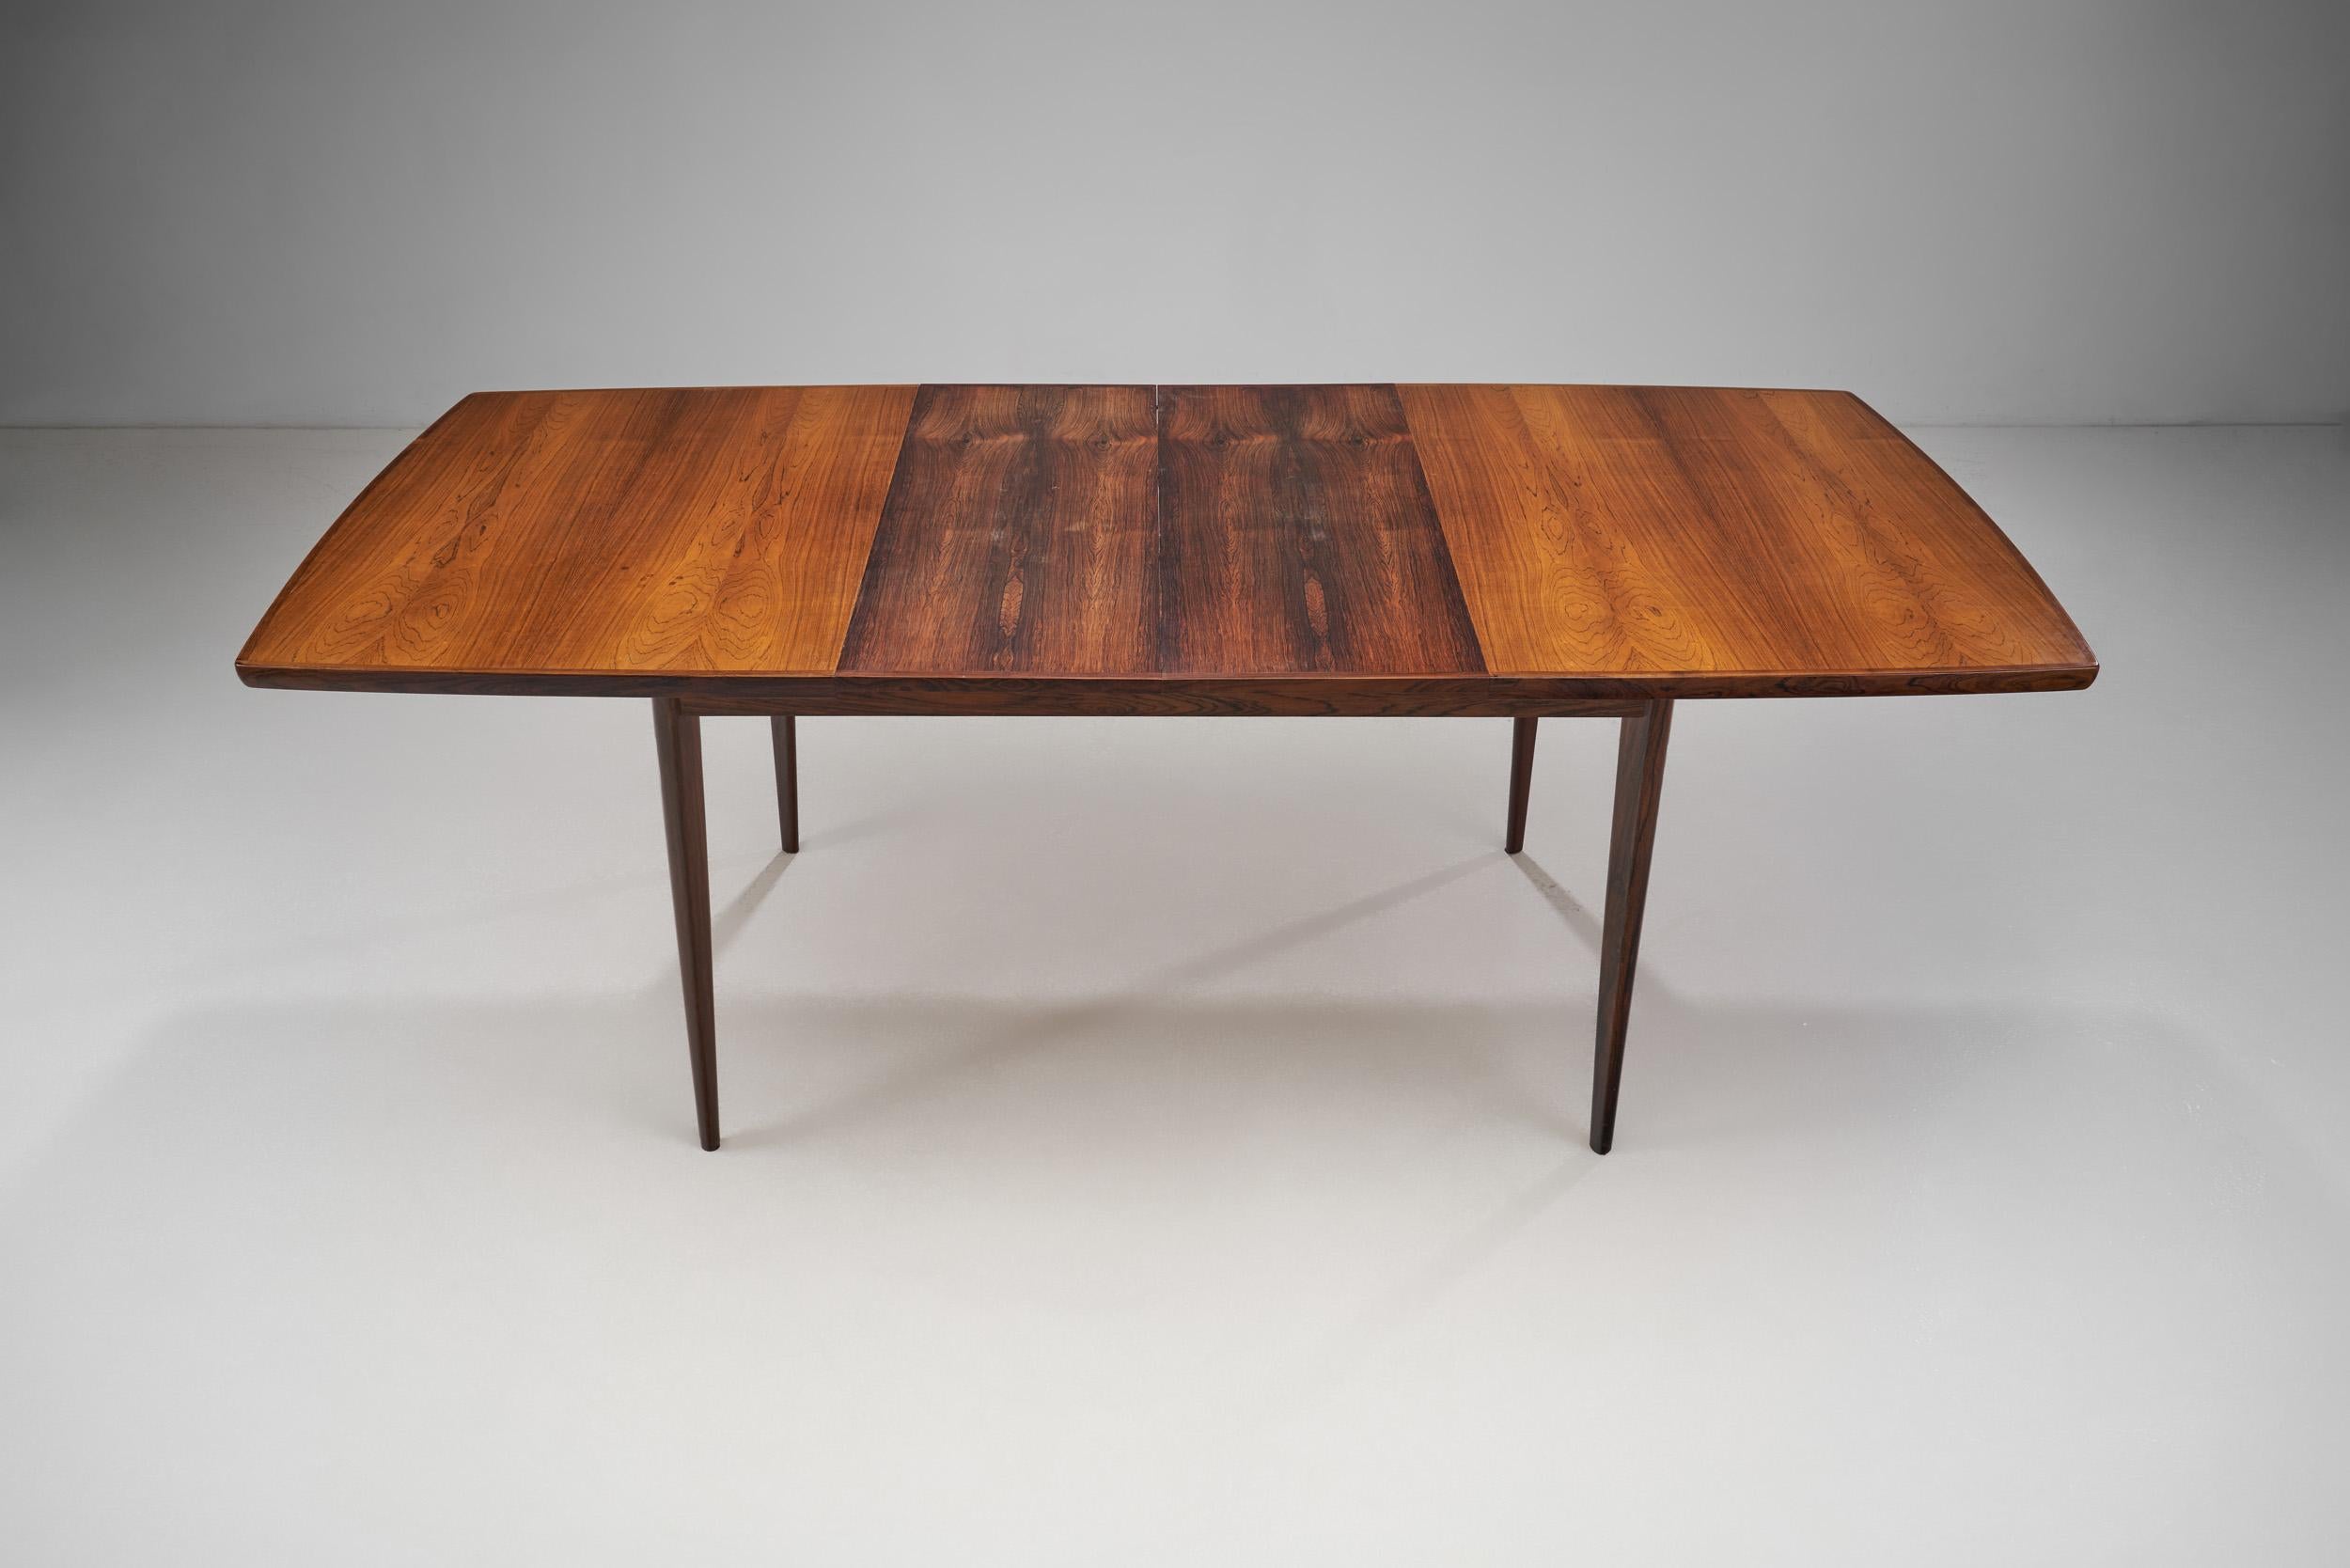 Mid-20th Century Exotic Wood Extendable Dining Table by Bernhard Pedersen & Søn, Denmark 1960s For Sale